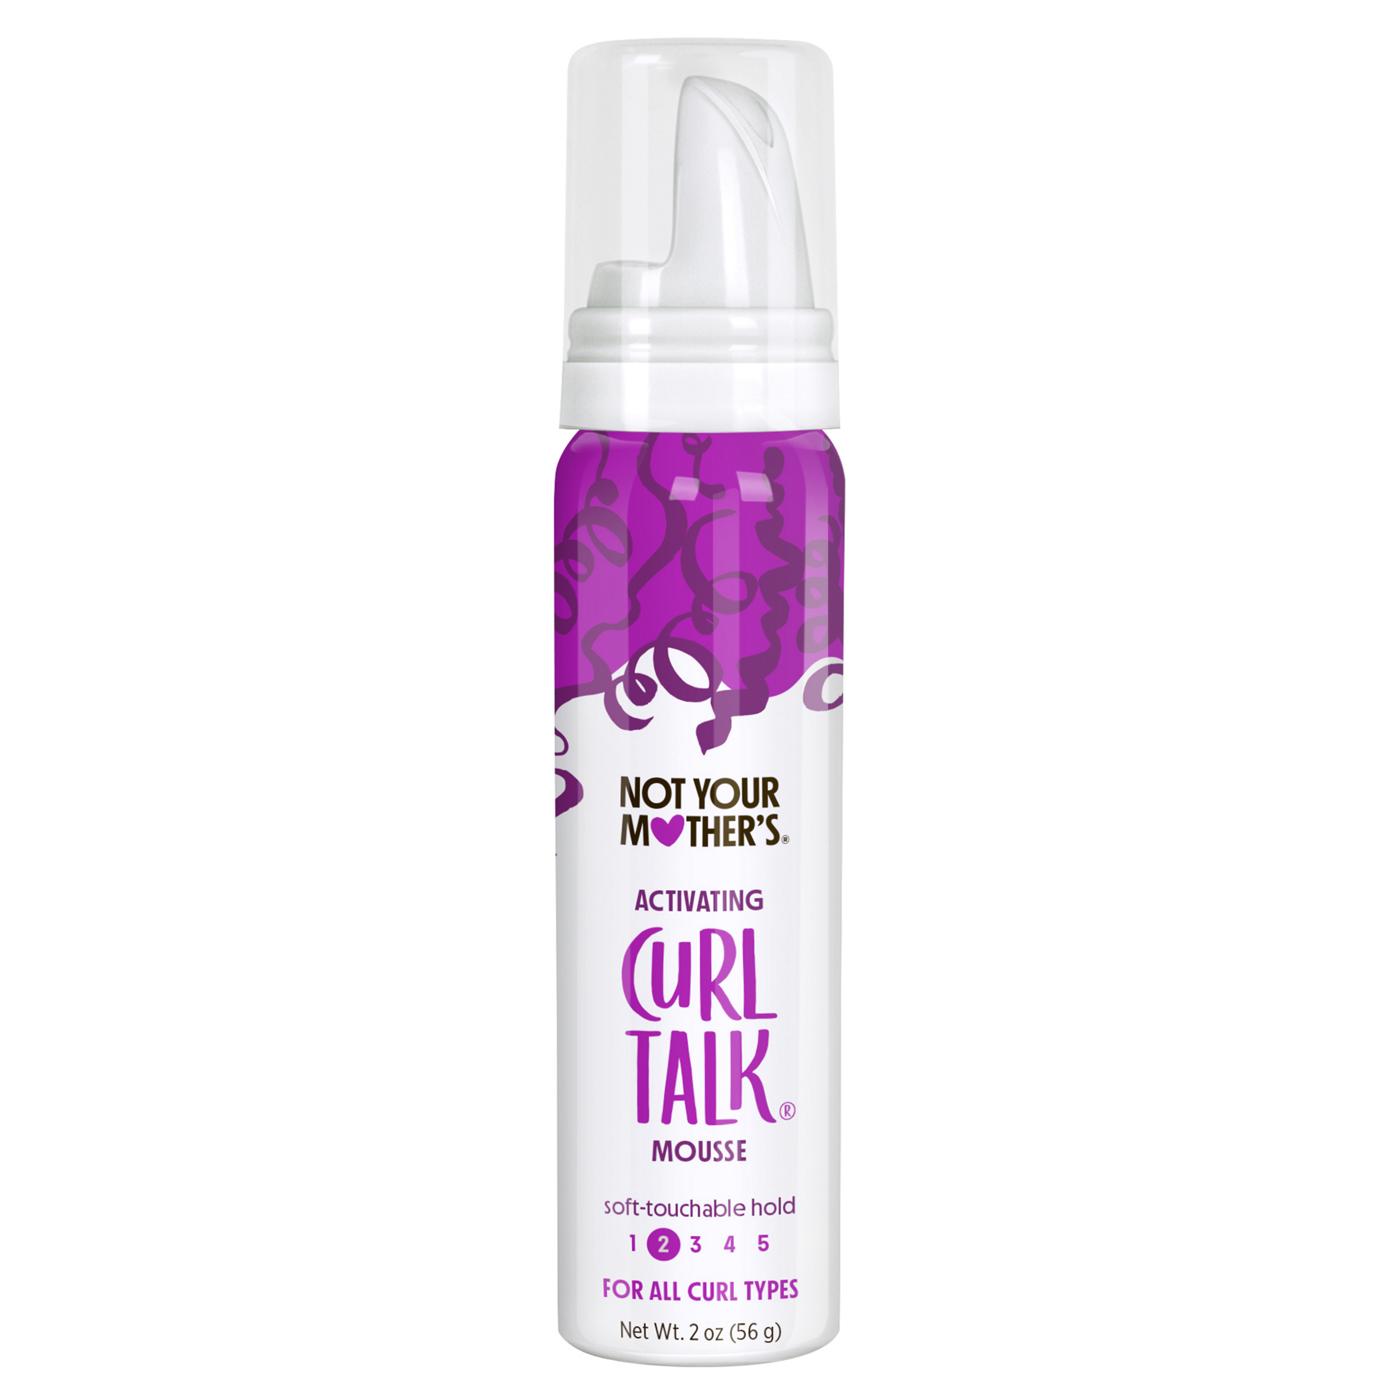 Not Your Mother's Curl Talk Mousse; image 1 of 2